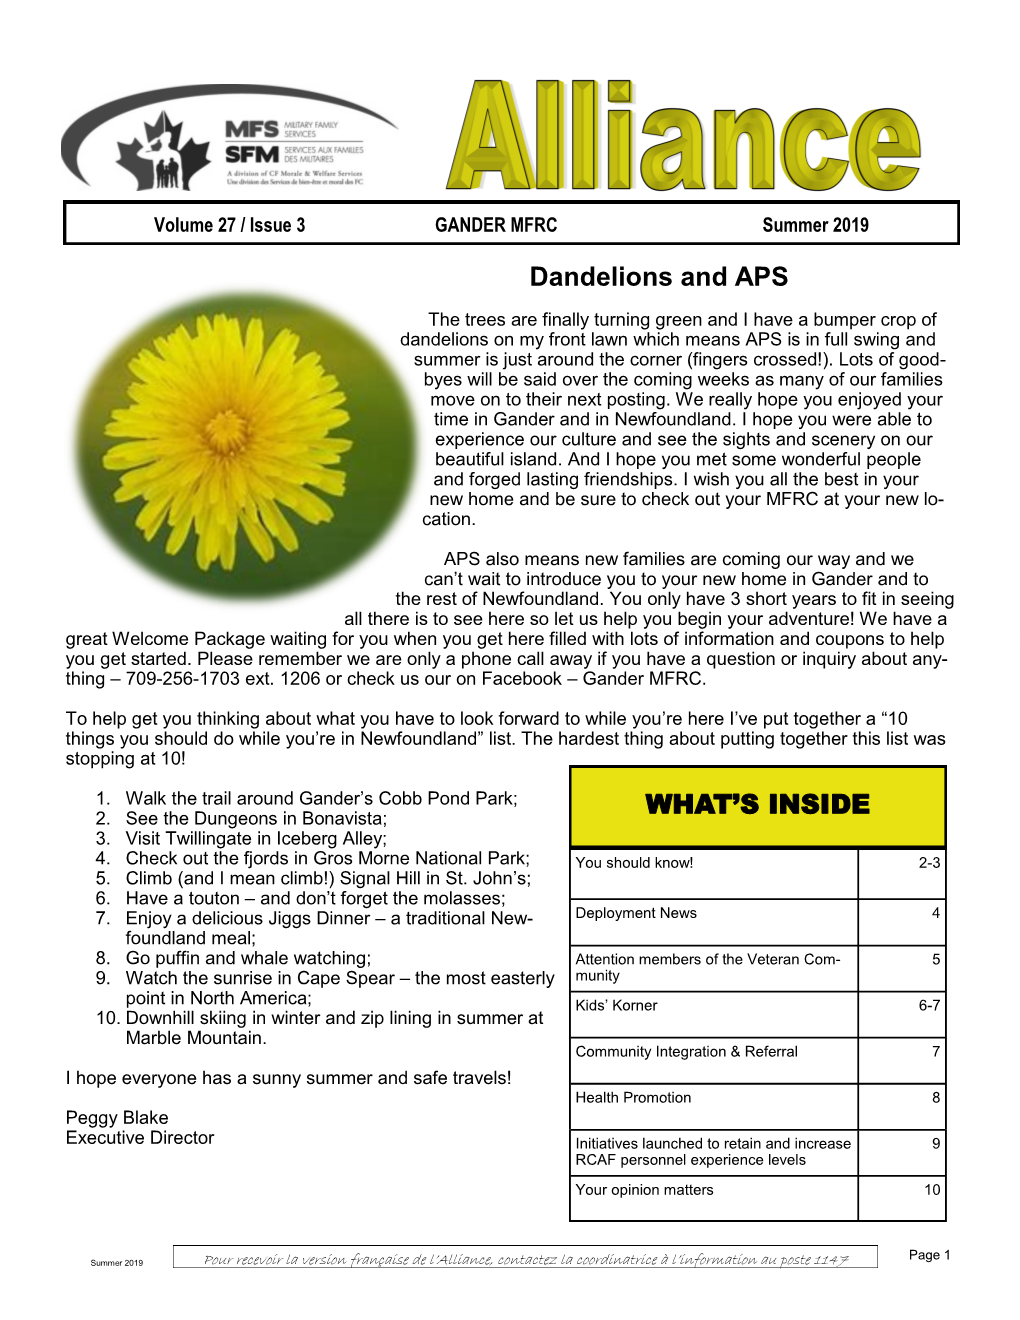 Dandelions and APS WHAT's INSIDE